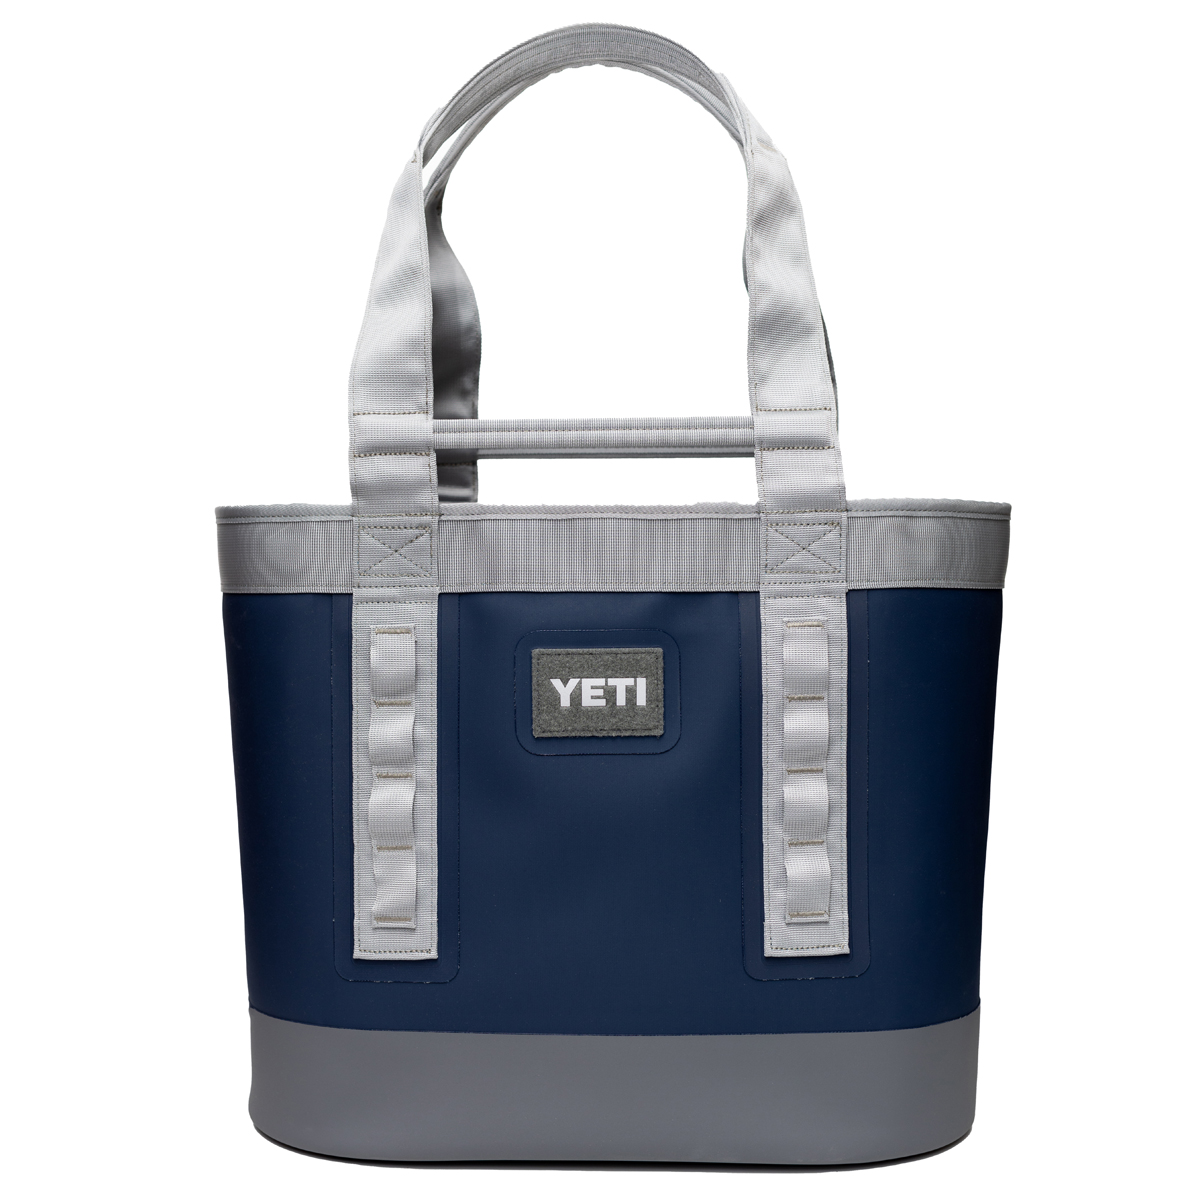 In Defense of the $200 Yeti Tote